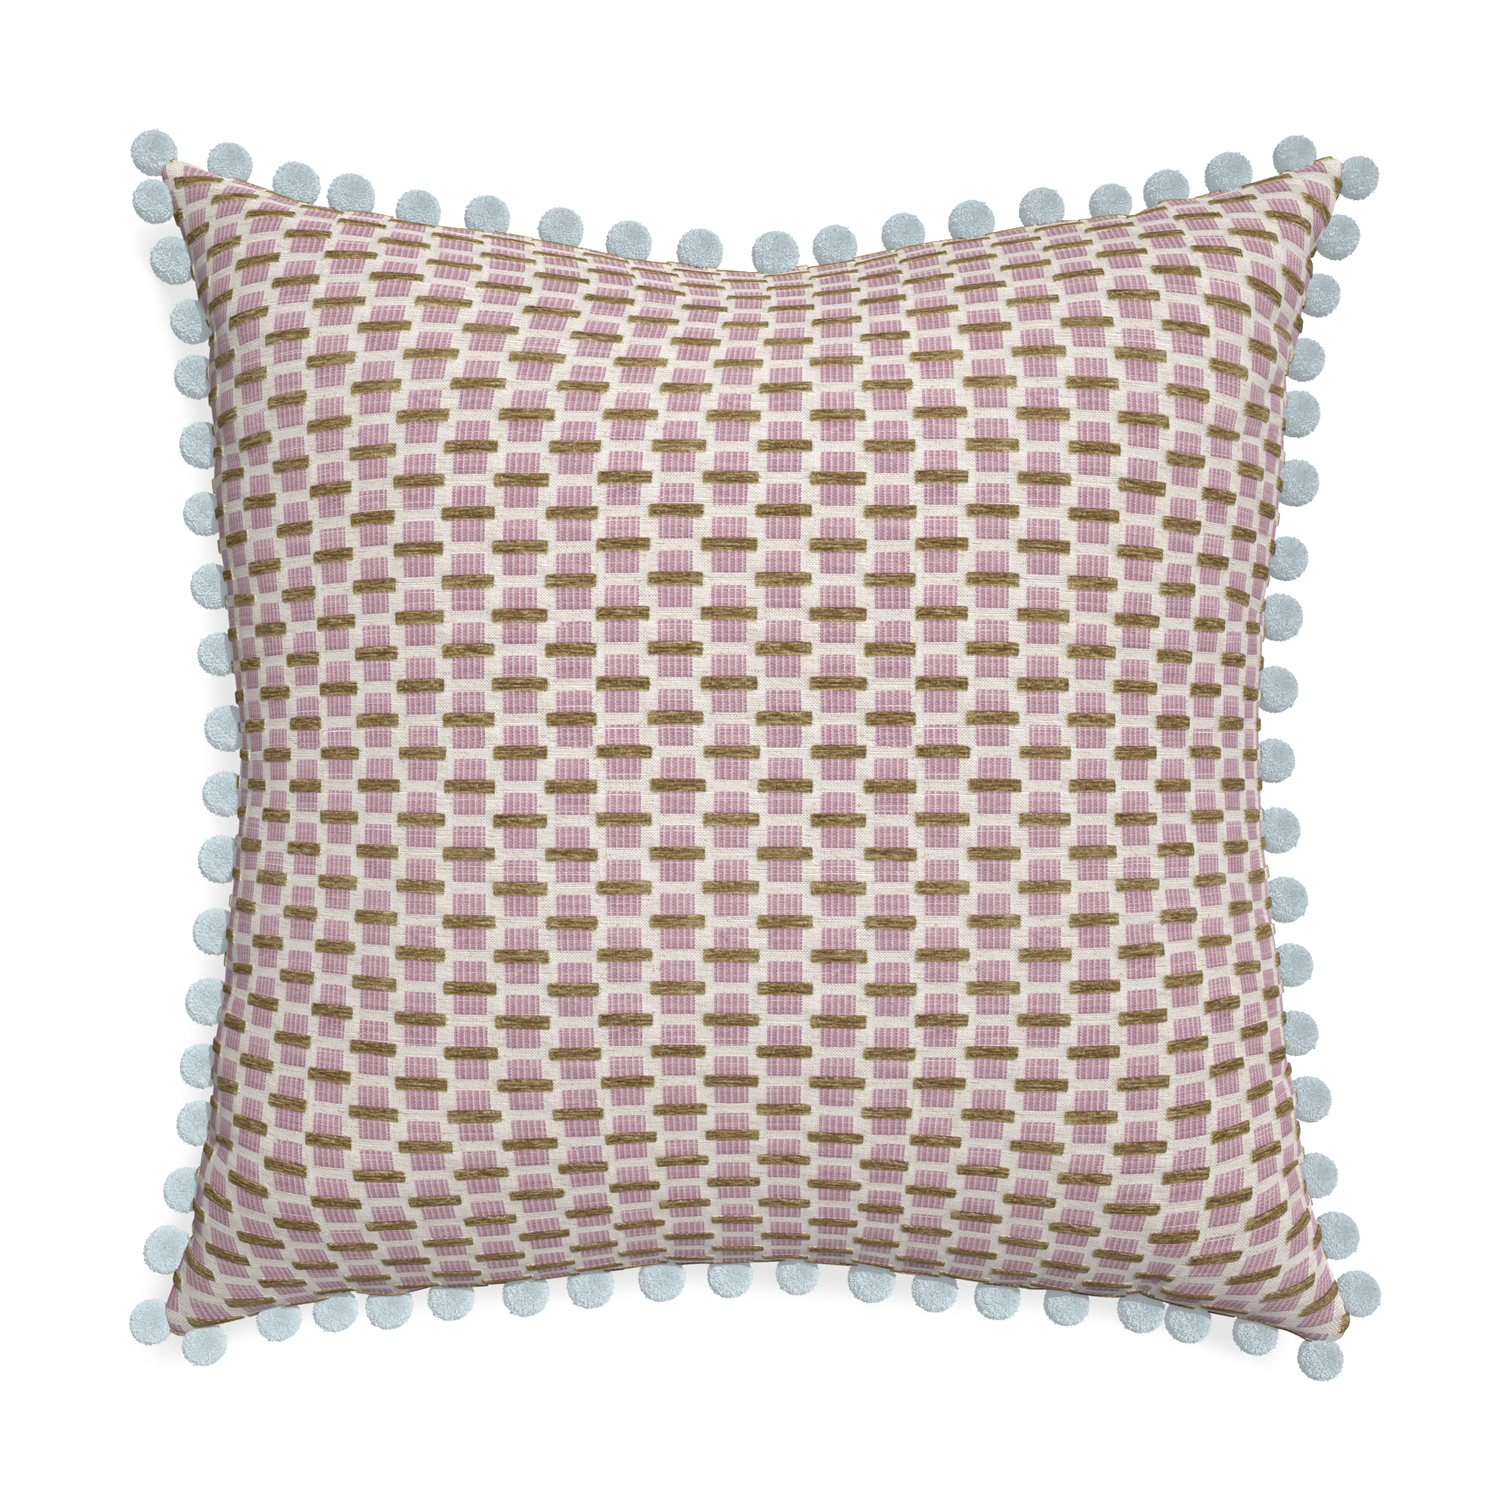 Euro-sham willow orchid custom pink geometric chenillepillow with powder pom pom on white background